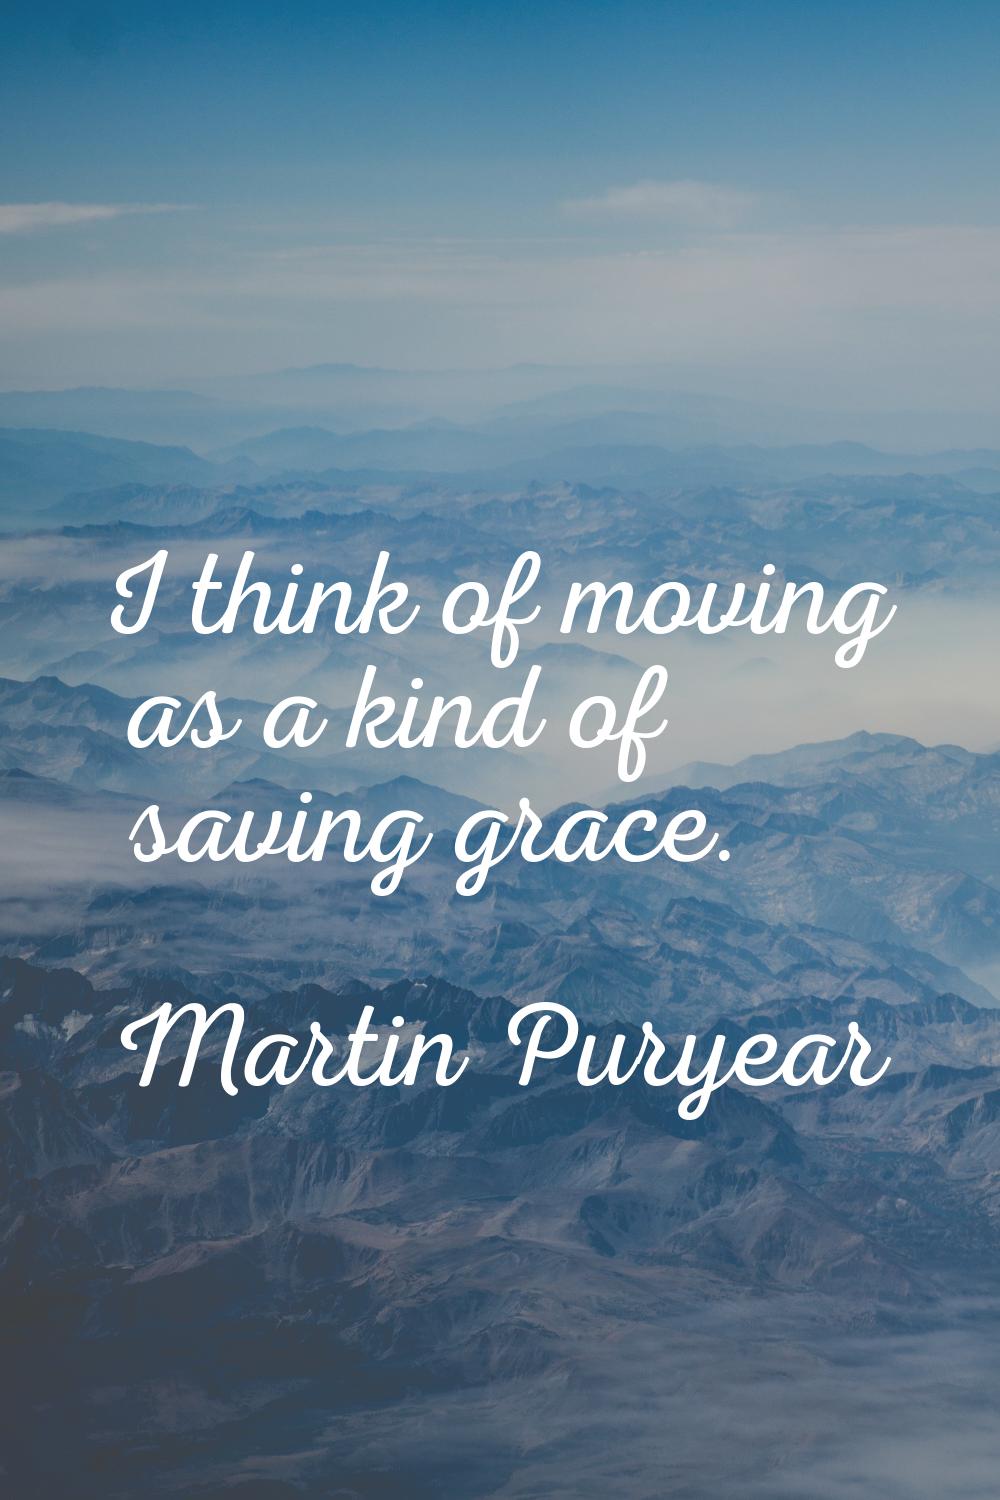 I think of moving as a kind of saving grace.